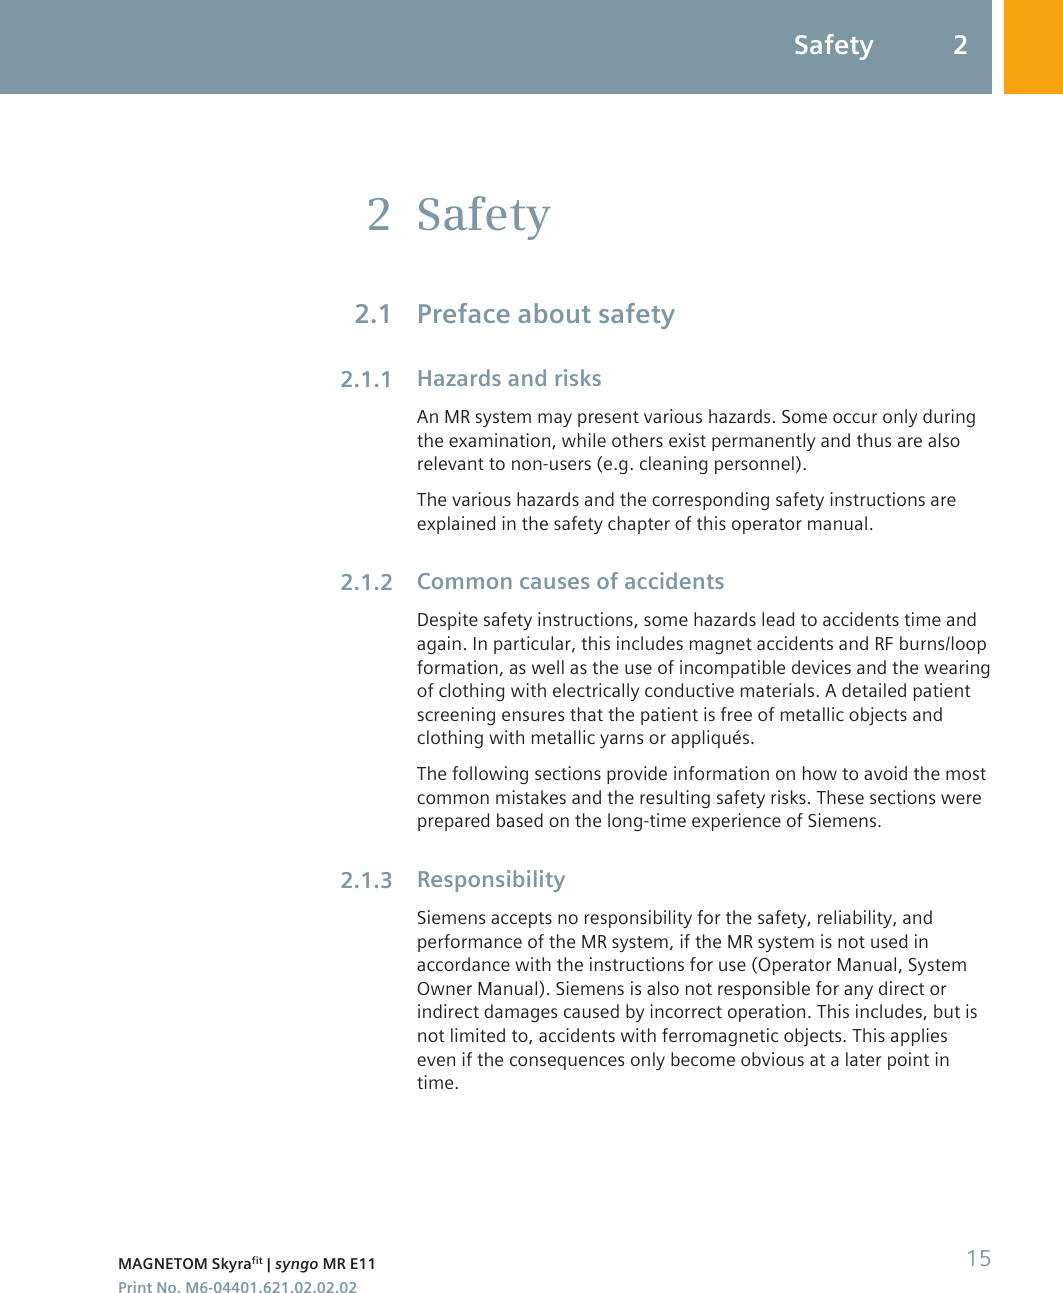 SafetyPreface about safetyHazards and risksAn MR system may present various hazards. Some occur only duringthe examination, while others exist permanently and thus are alsorelevant to non-users (e.g. cleaning personnel).The various hazards and the corresponding safety instructions areexplained in the safety chapter of this operator manual.Common causes of accidentsDespite safety instructions, some hazards lead to accidents time andagain. In particular, this includes magnet accidents and RF burns/loopformation, as well as the use of incompatible devices and the wearingof clothing with electrically conductive materials. A detailed patientscreening ensures that the patient is free of metallic objects andclothing with metallic yarns or appliqués.The following sections provide information on how to avoid the mostcommon mistakes and the resulting safety risks. These sections wereprepared based on the long-time experience of Siemens.ResponsibilitySiemens accepts no responsibility for the safety, reliability, andperformance of the MR system, if the MR system is not used inaccordance with the instructions for use (Operator Manual, SystemOwner Manual). Siemens is also not responsible for any direct orindirect damages caused by incorrect operation. This includes, but isnot limited to, accidents with ferromagnetic objects. This applieseven if the consequences only become obvious at a later point intime.22.12.1.12.1.22.1.3Safety 2MAGNETOM Skyrafit | syngo MR E11 15Print No. M6-04401.621.02.02.02